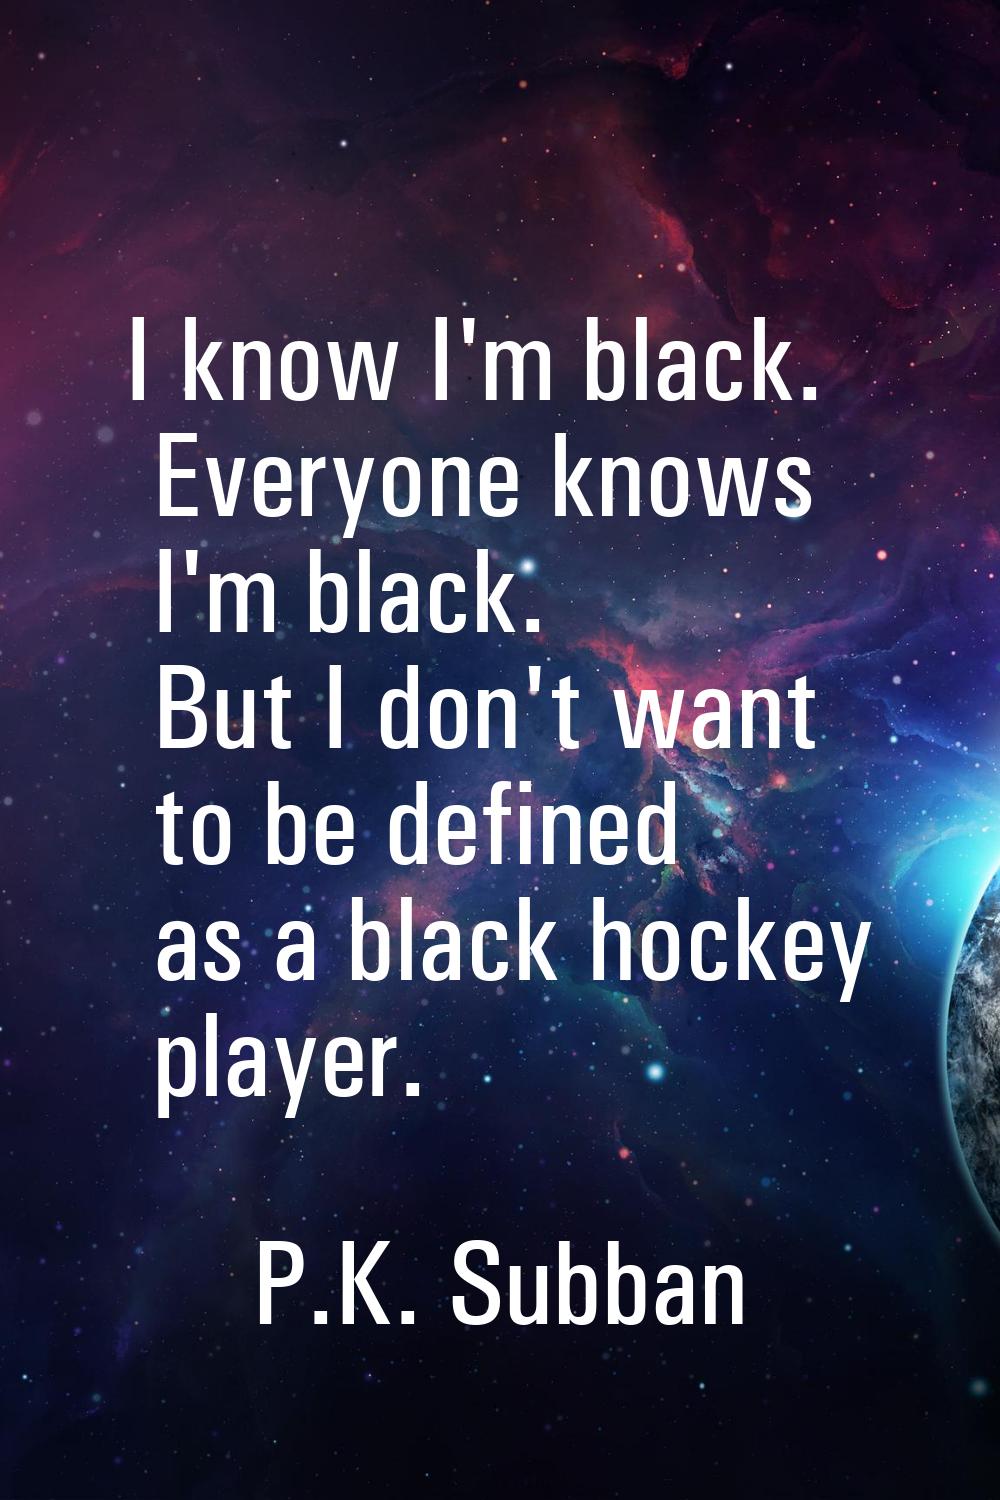 I know I'm black. Everyone knows I'm black. But I don't want to be defined as a black hockey player